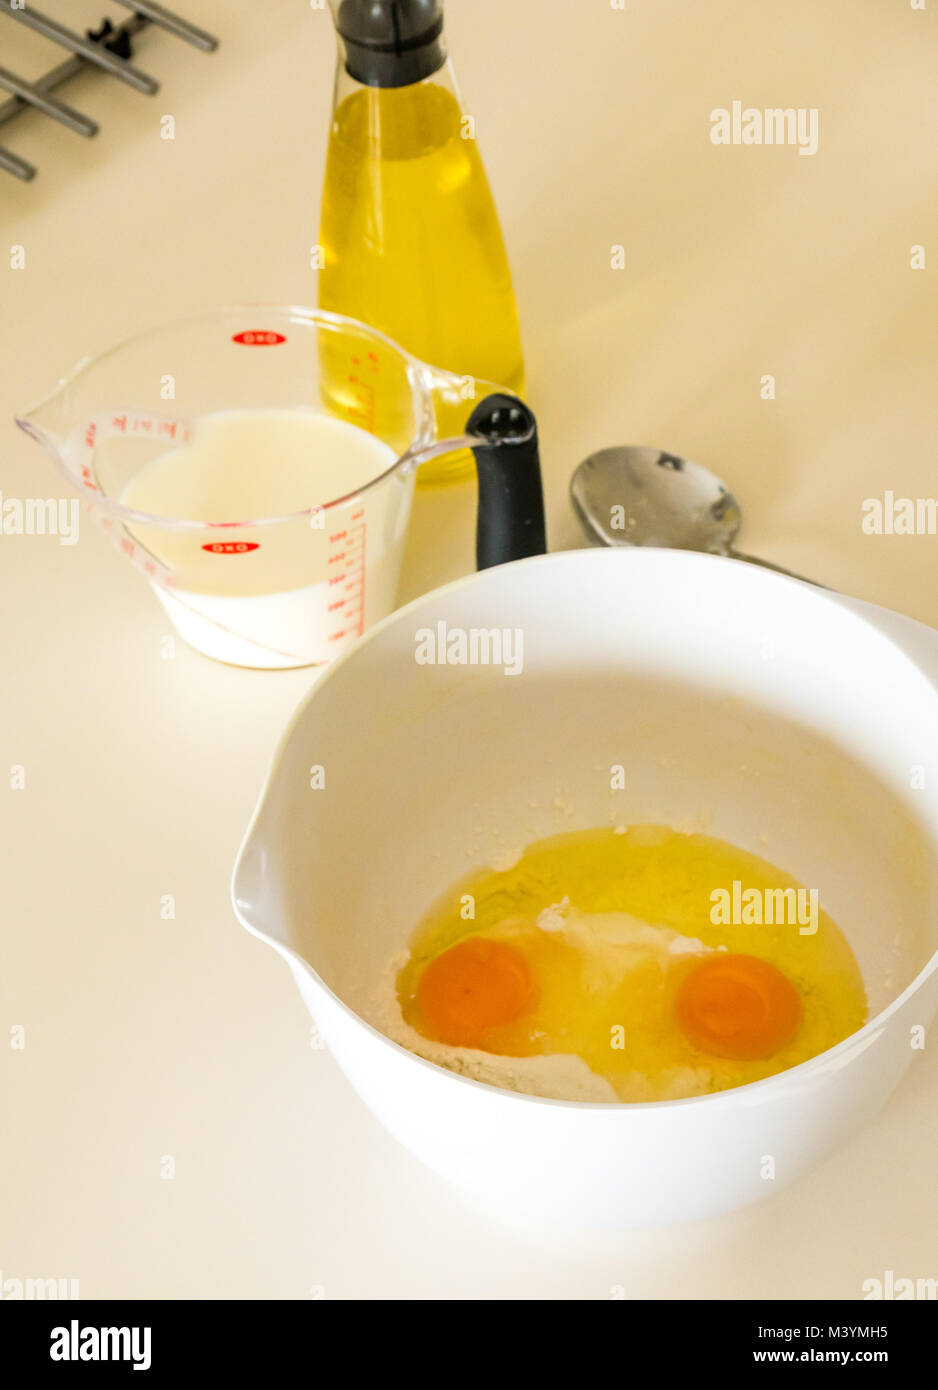 Preparation of pancake batter for Shrove Tuesday with flour, milk, eggs, and oil in a home kitchen Stock Photo